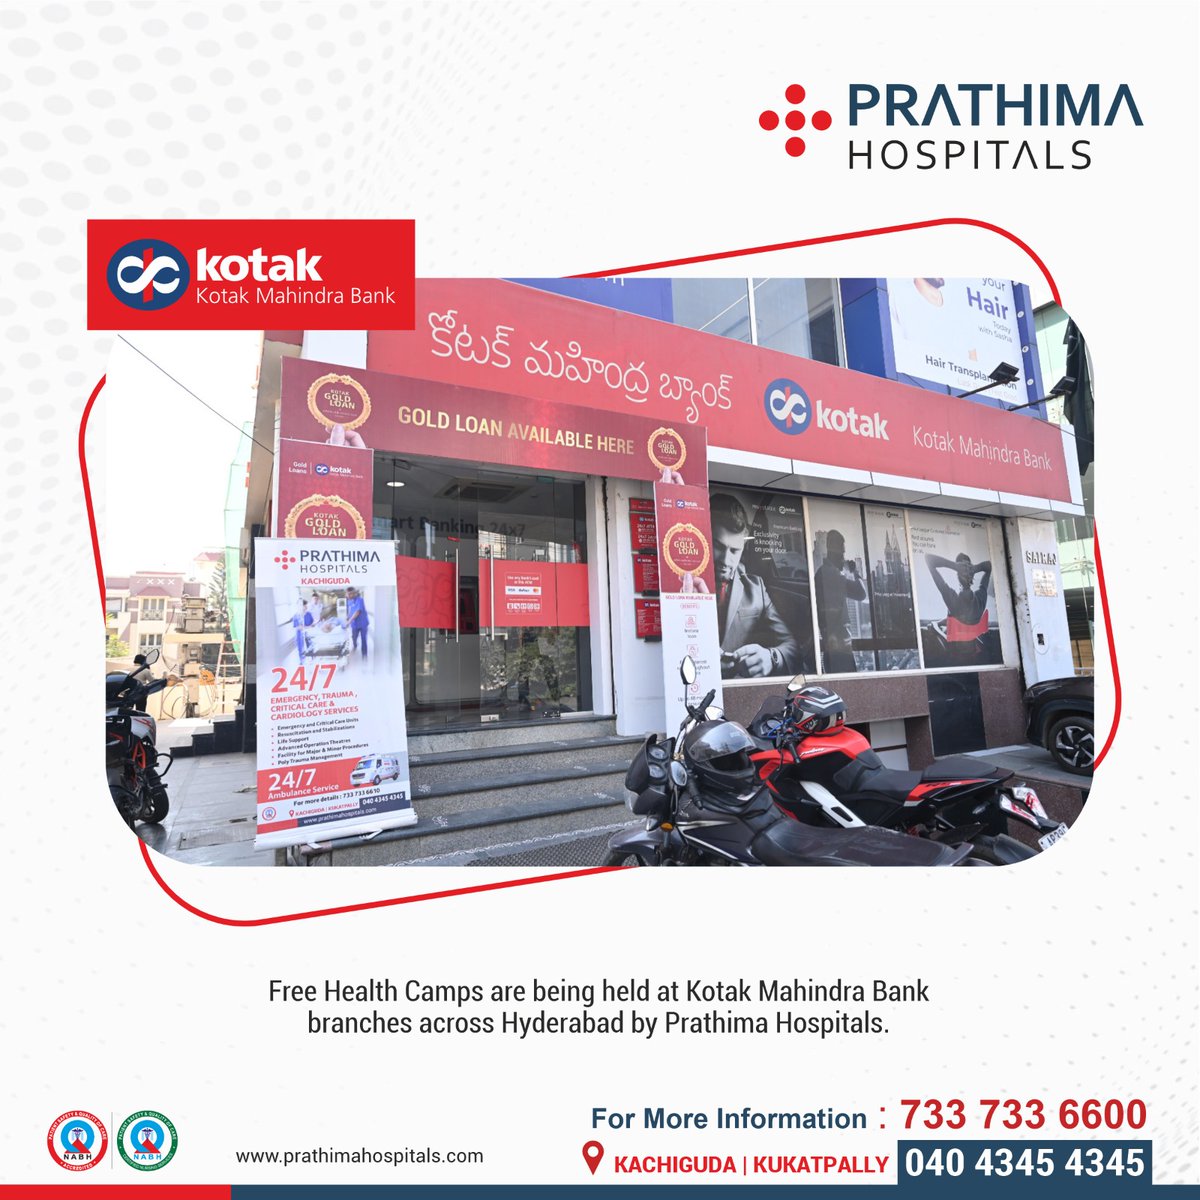 #freehealthcamps are being held at kotak mahindra bank branchs across Hyderabad by Prathima Hospitals.

For more details:
📞:: 733 733 6600 | 040 4345 4345
🌐:: prathimahospitals.com

#healthcamps #healthcampaigns #Kotakmahindrabanks #healthcheck #healthcamp #healthcheckupcamps